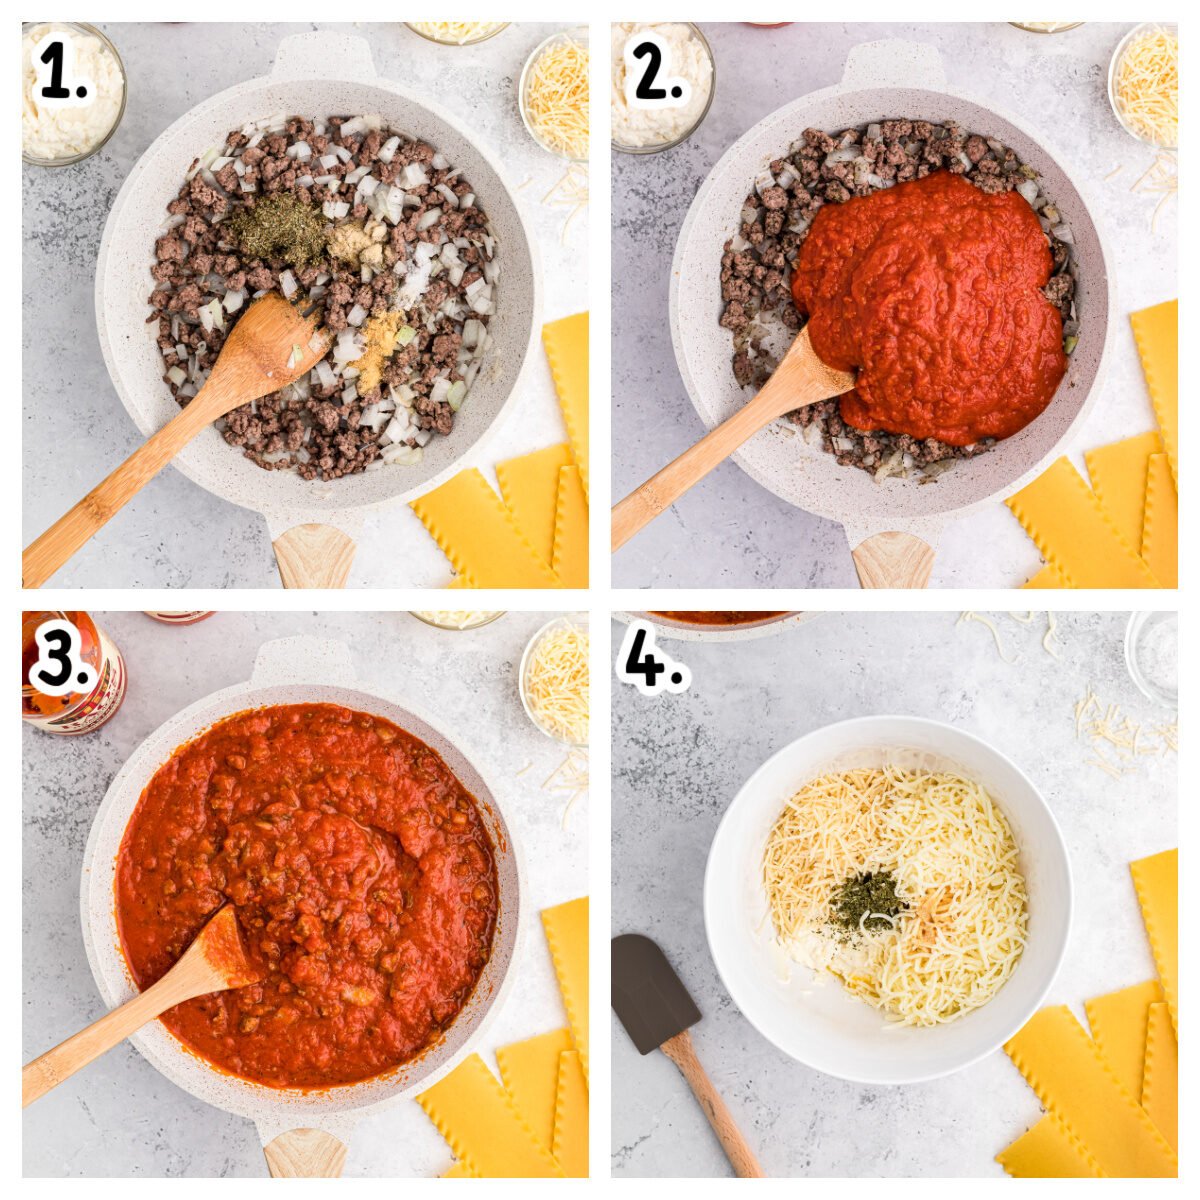 oven images showing how to make sauce and ricotta mixture for lasagna.